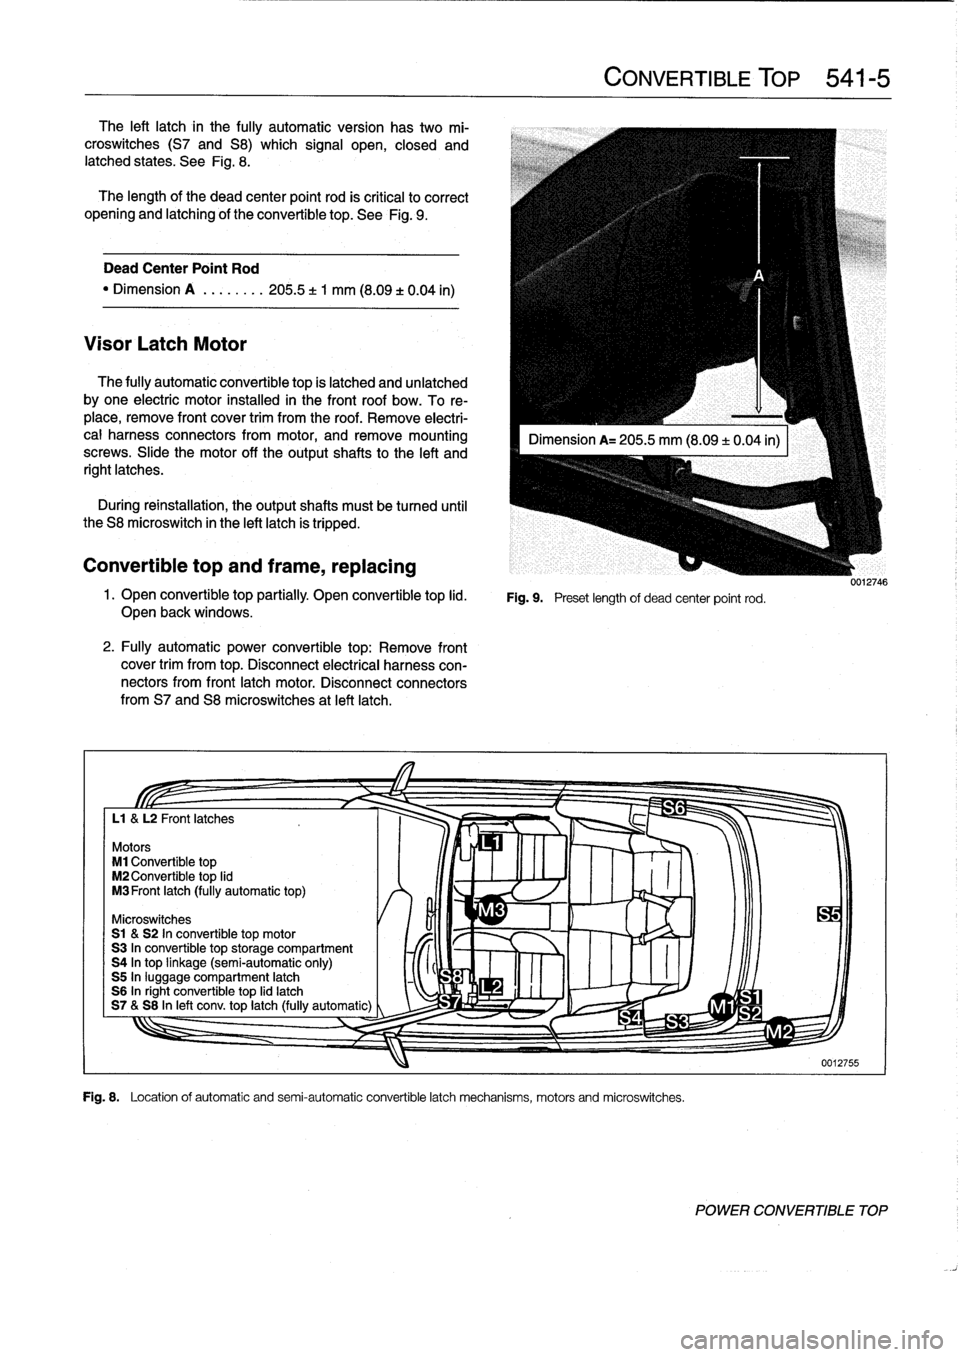 BMW 318i 1997 E36 Owners Guide 
The
left
latch
in
the
fully
automatic
version
hastwo
mi-
croswitches
(S7
and
S8)which
signal
open,
closed
and
latched
states
.
See
Fig
.
8
.

The
length
of
the
dead
center
point
rod
is
critica¡
lo
c